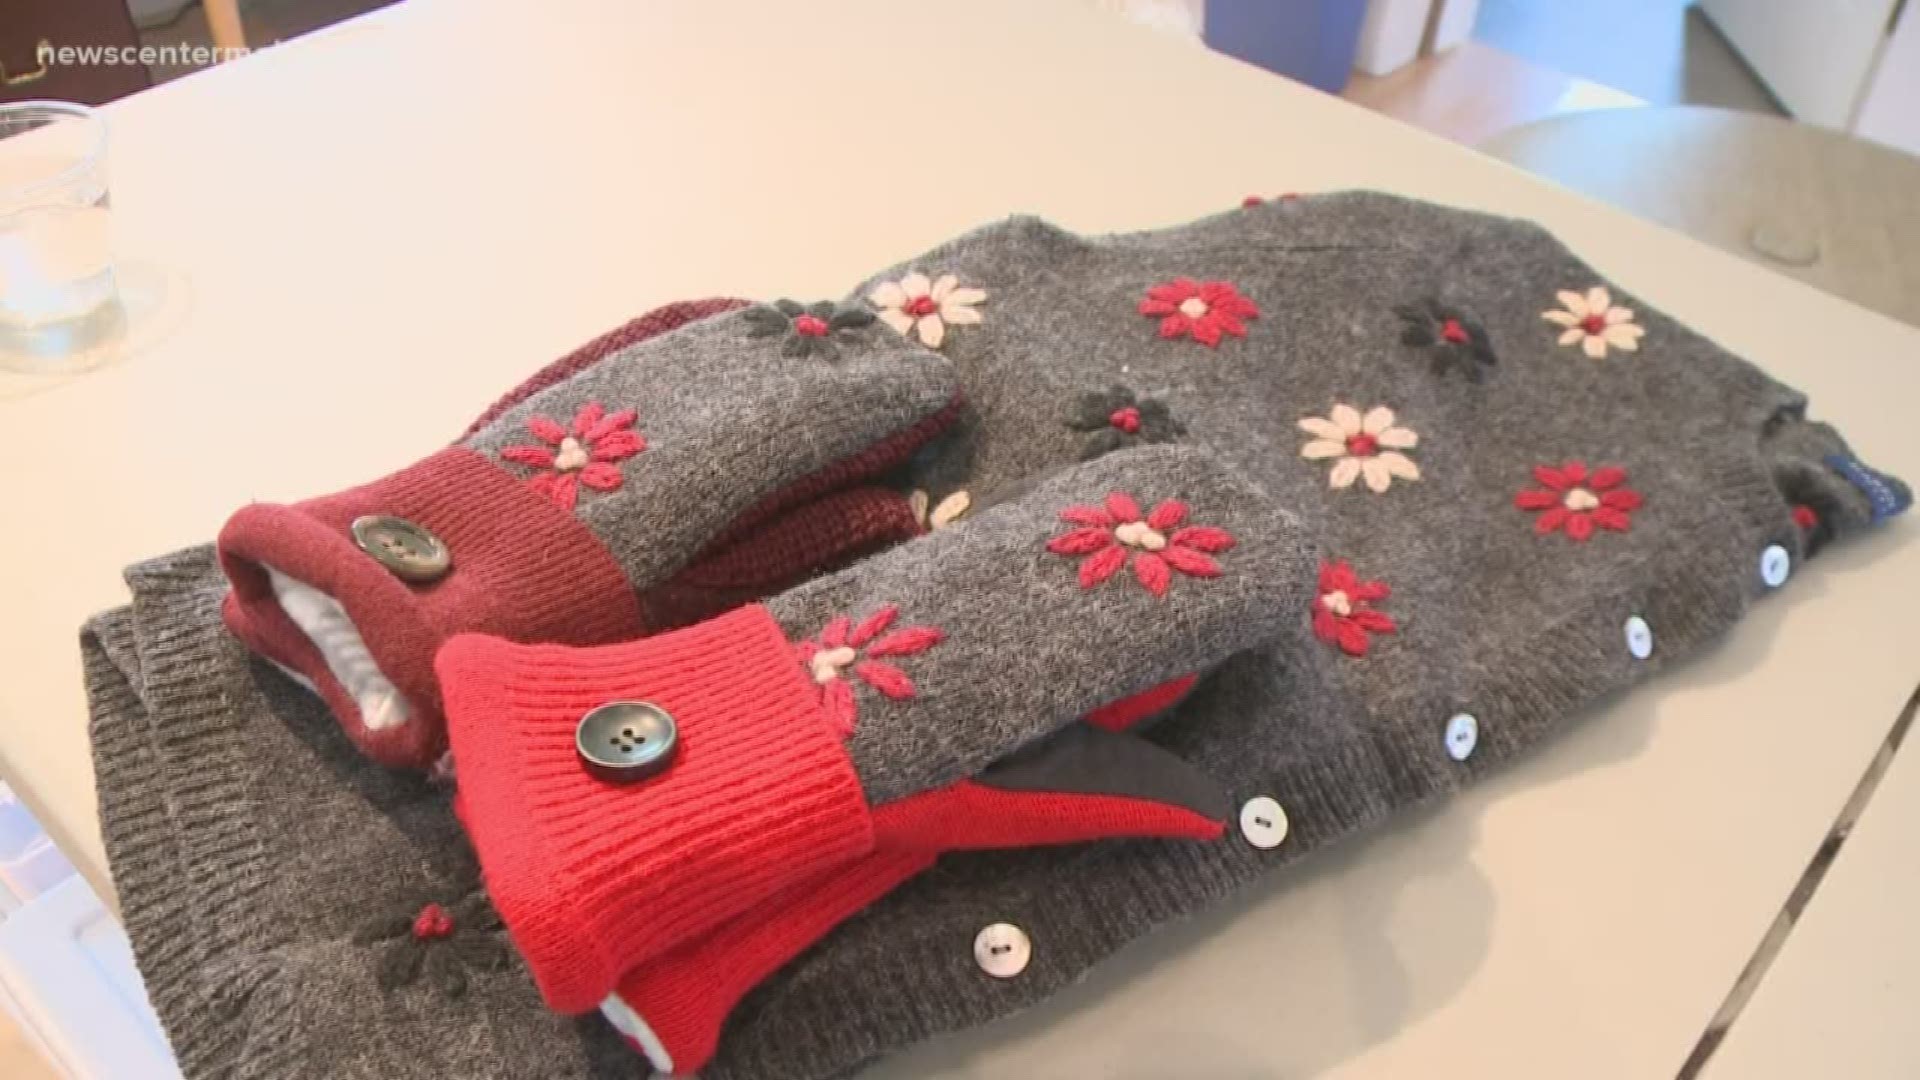 "Memory Mittens" began when a friend asked Marilyn Robertson to create something out of the sweater of her late mother.